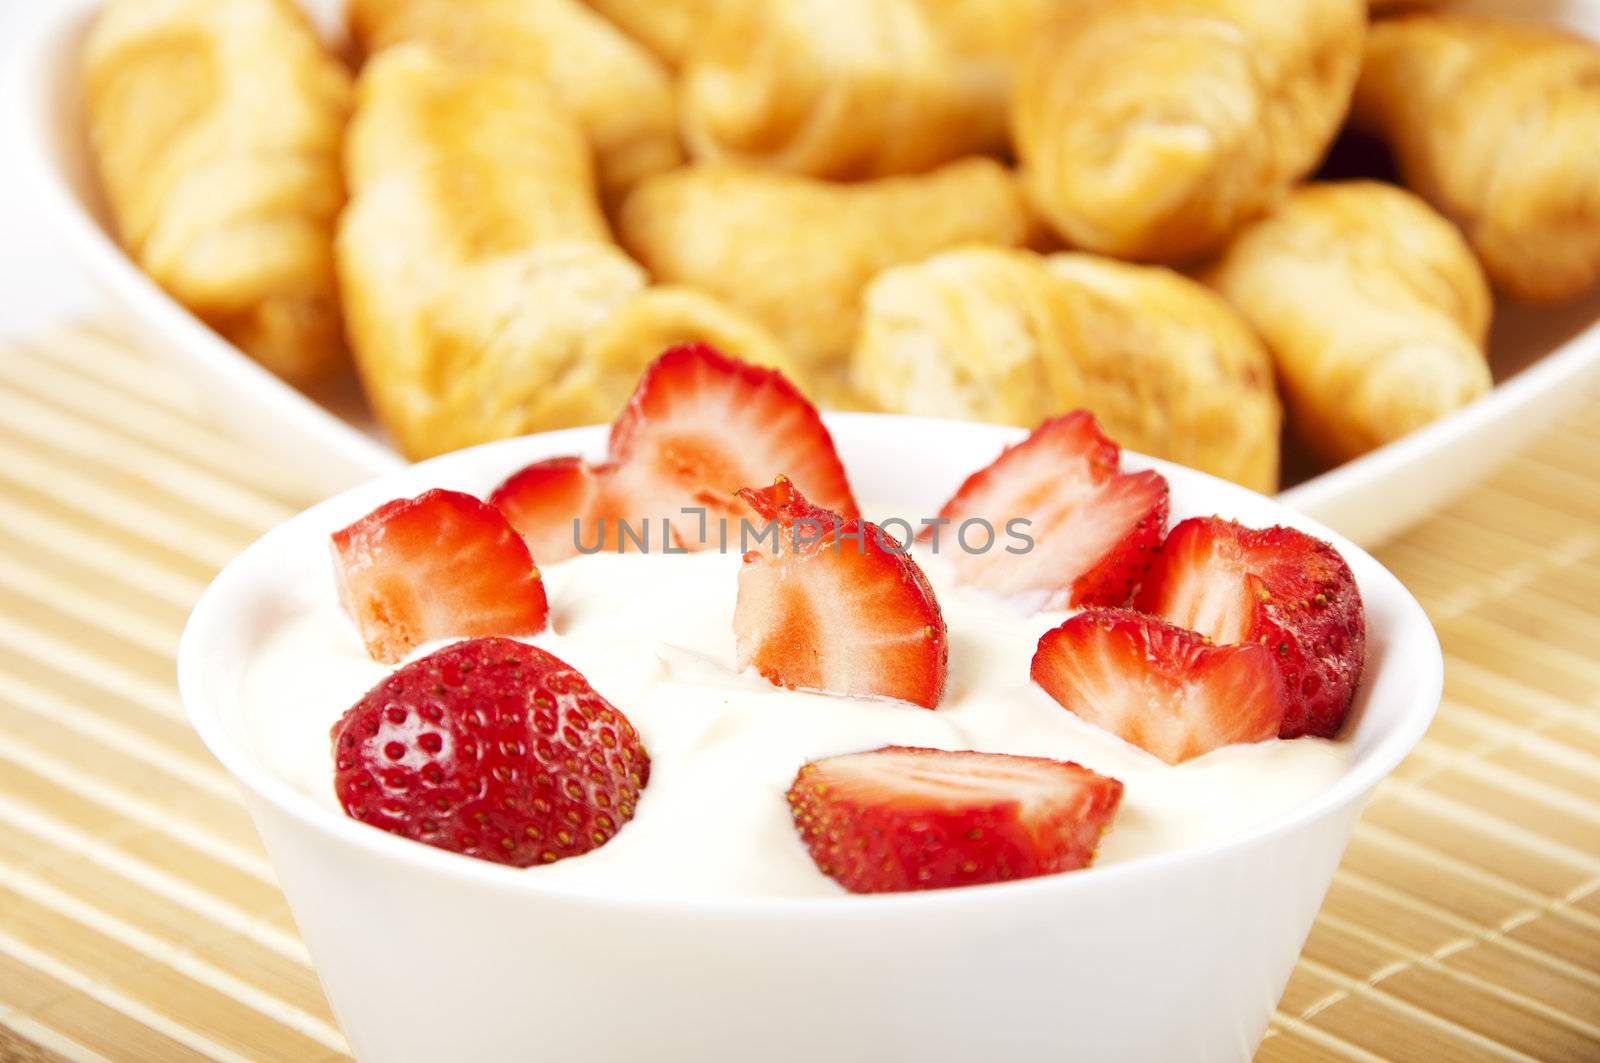 light Breakfast: croissants and Berries on a table on a light background